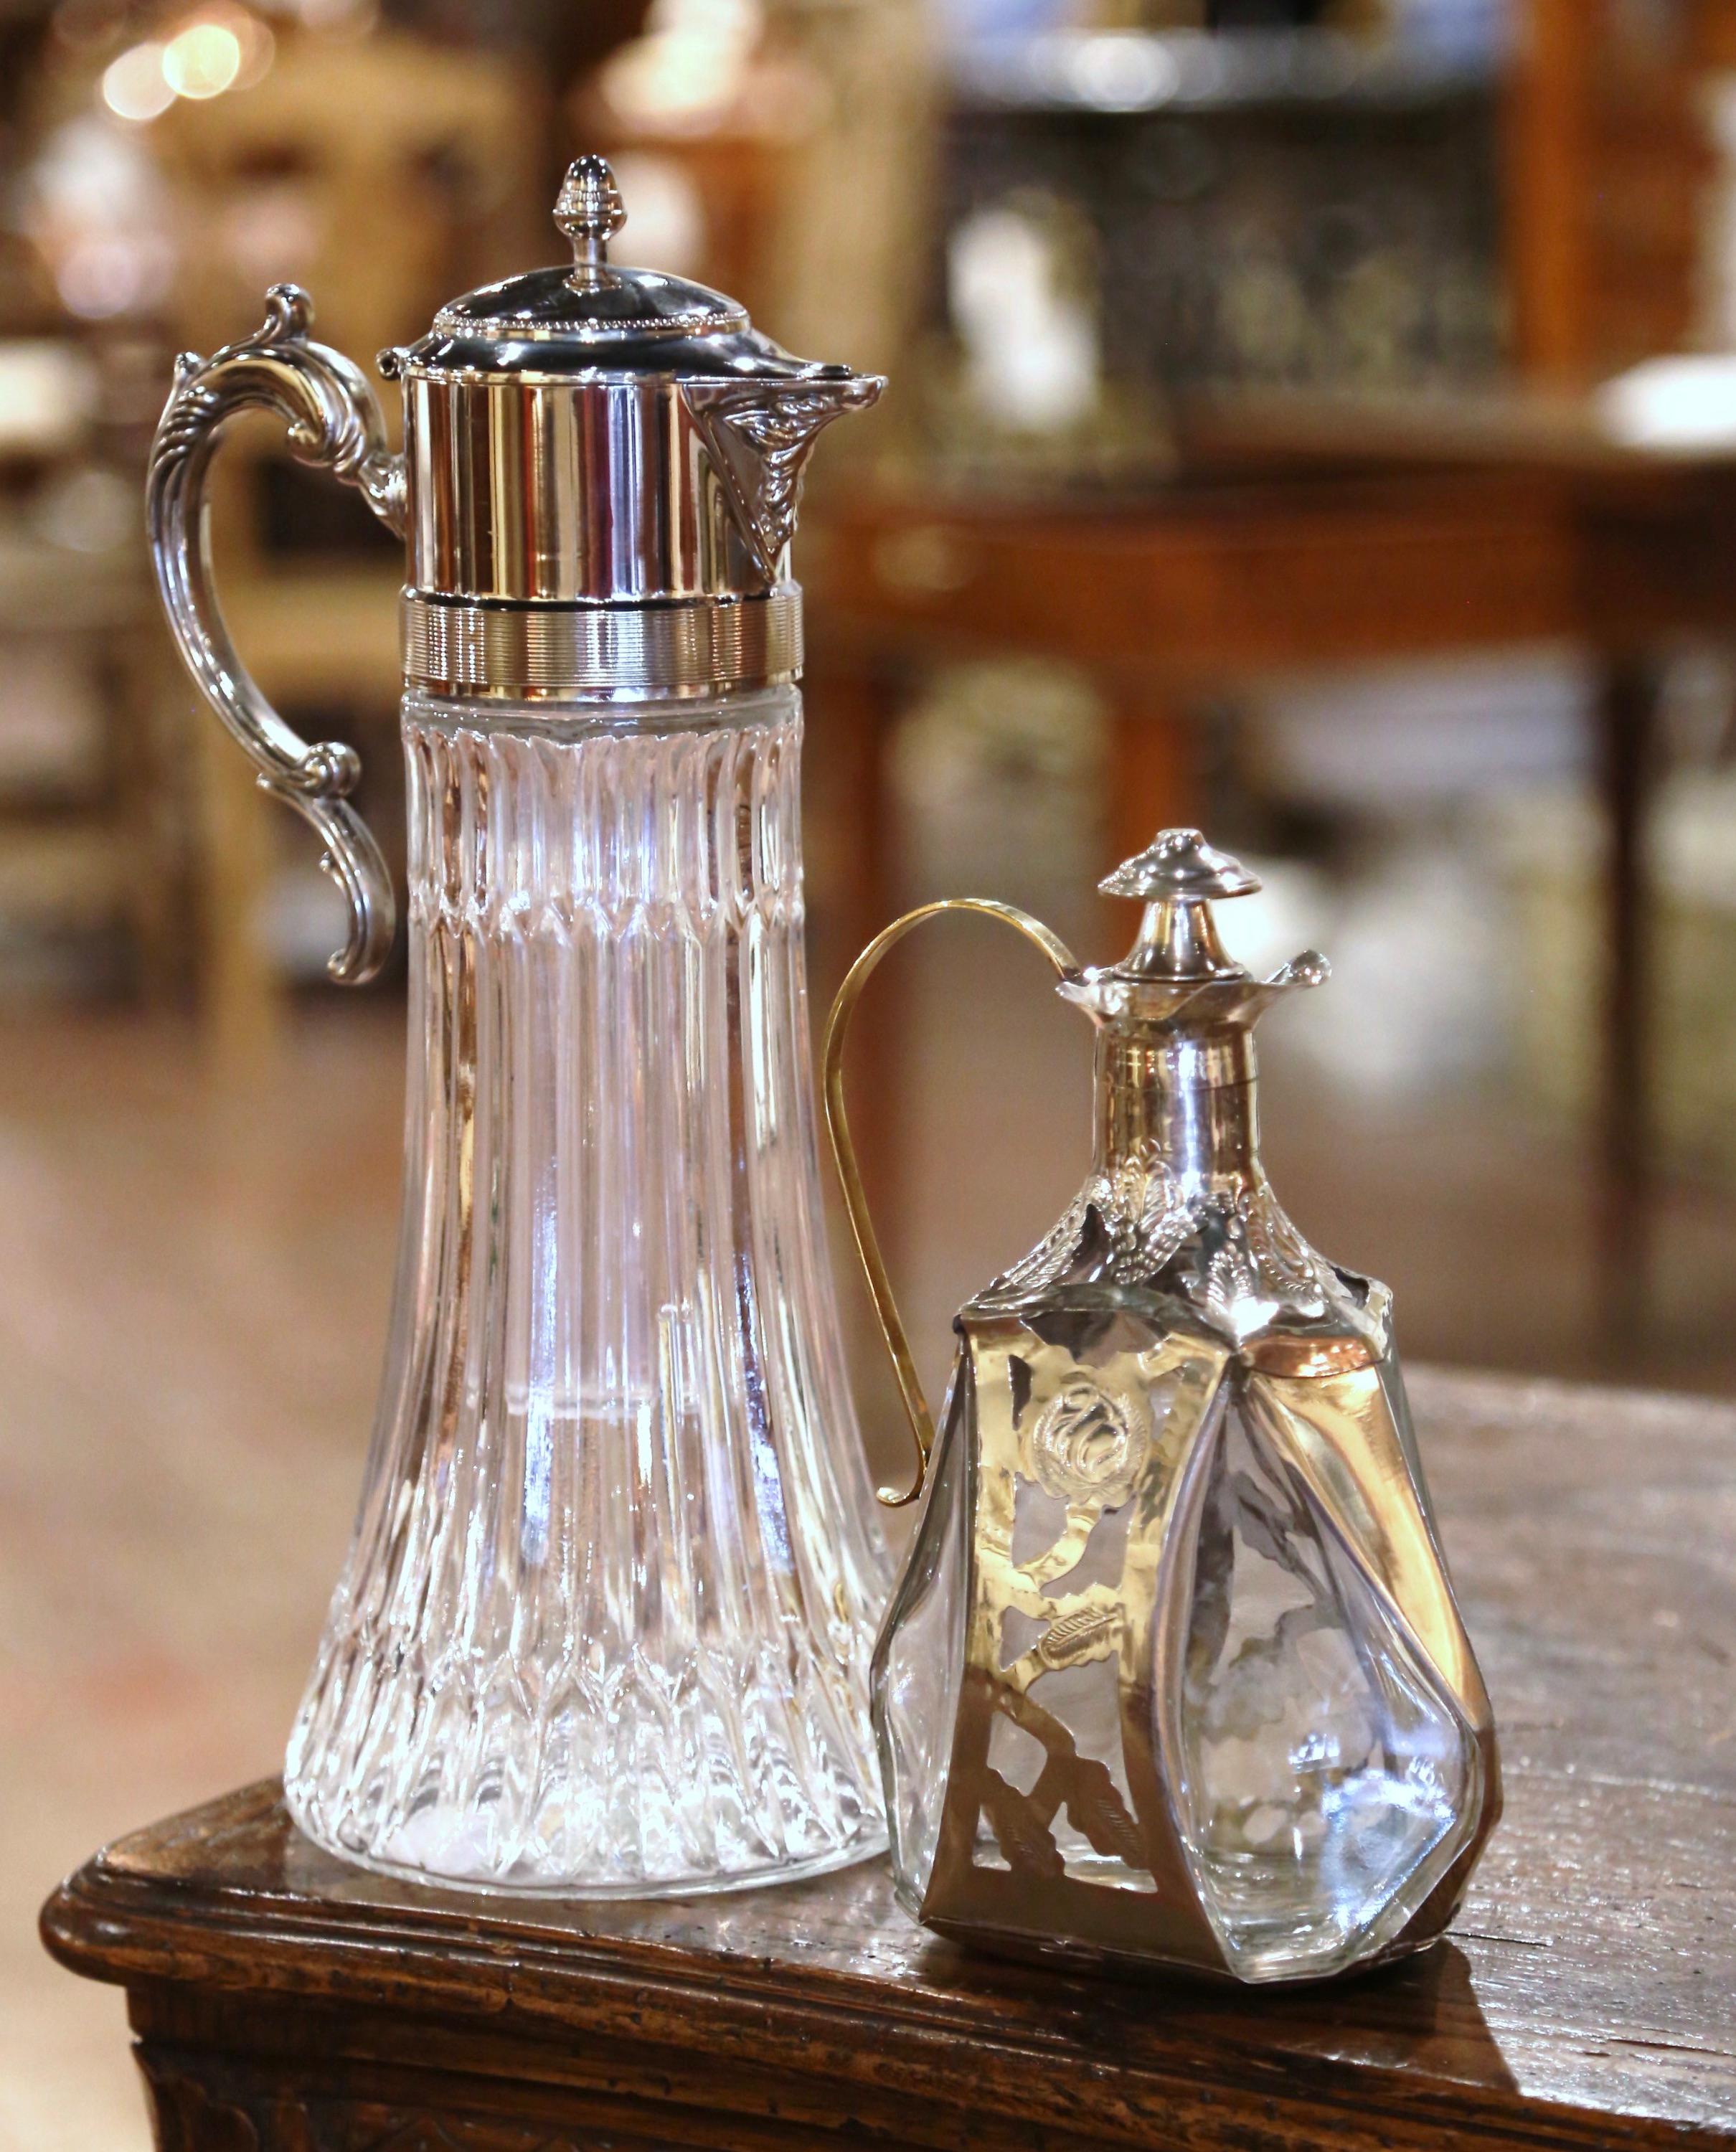 Serve your guests in style with this set of beautiful serve ware. Silver plated and made of crystal, this Claret Pitcher and Decanter set make a stunning pair. Place on top of a bar or a living room console to add a touch of Italian flair. Featuring